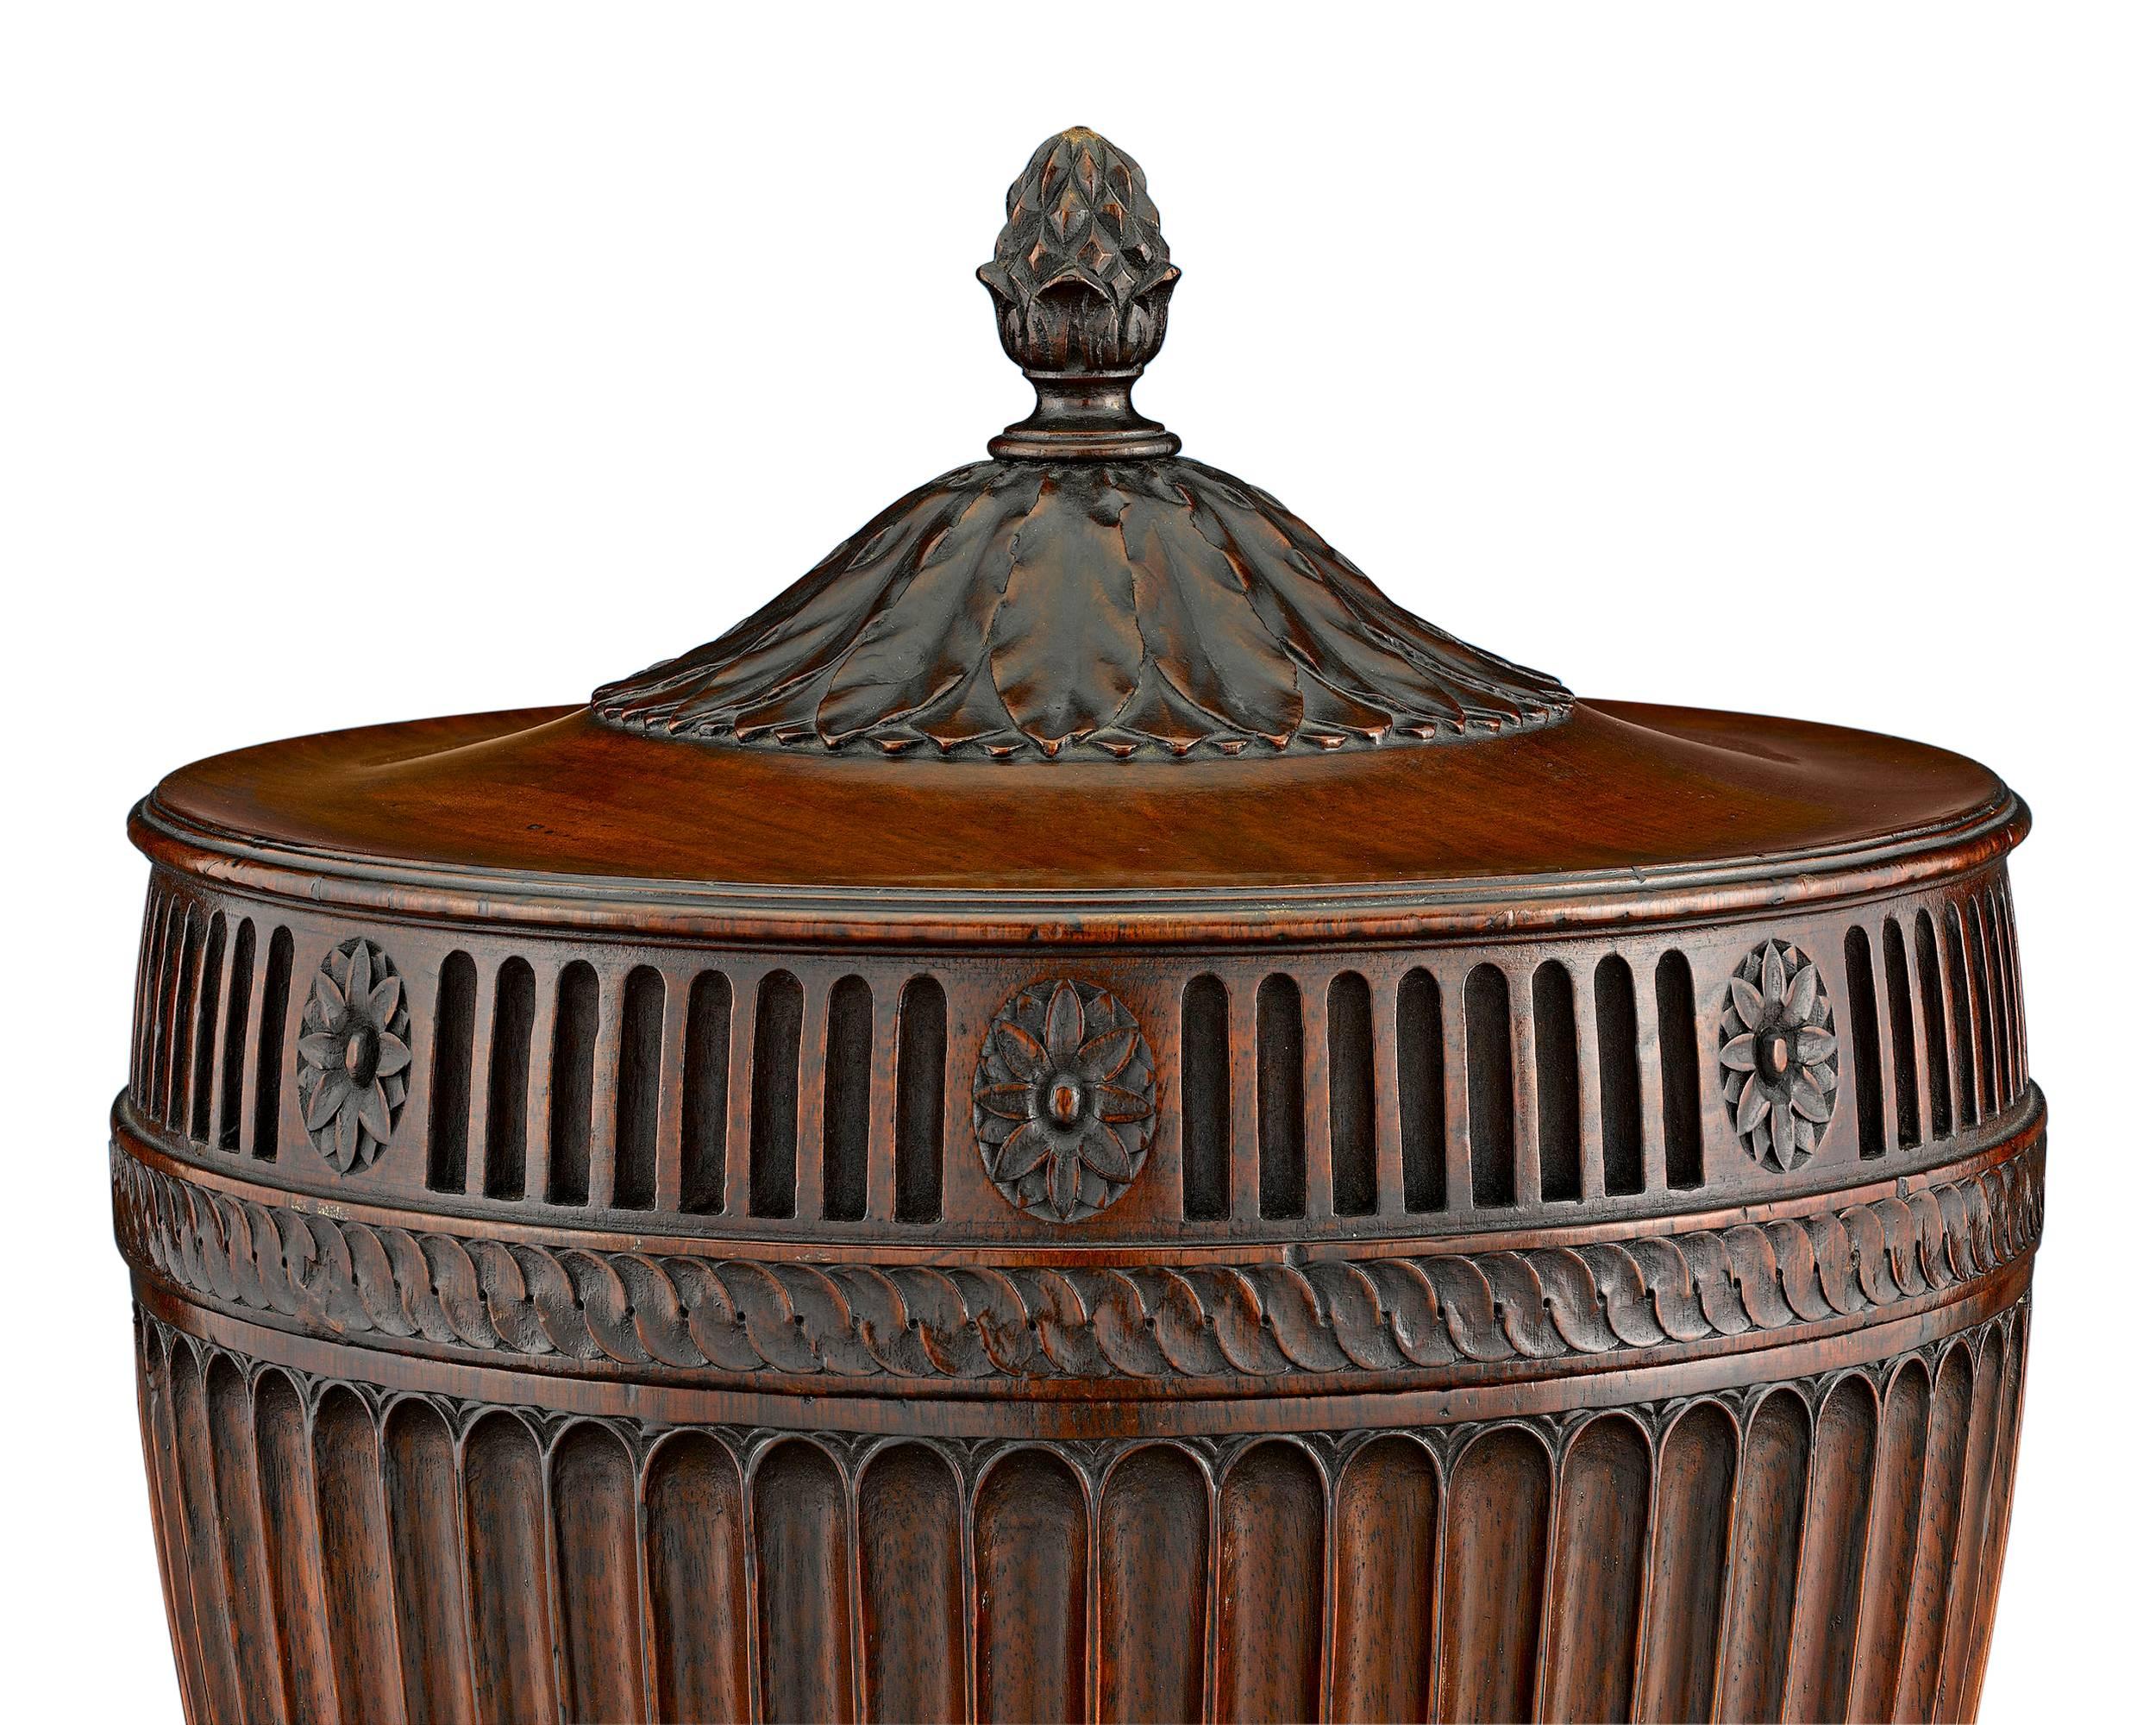 Exceptional carving and a rich, warm patina distinguish these rare George III-period mahogany urns. These Neoclassical vessels, highlighted by fluted, gadrooned, anthemion and acanthus motifs, feature their original spigots and linings. Most likely